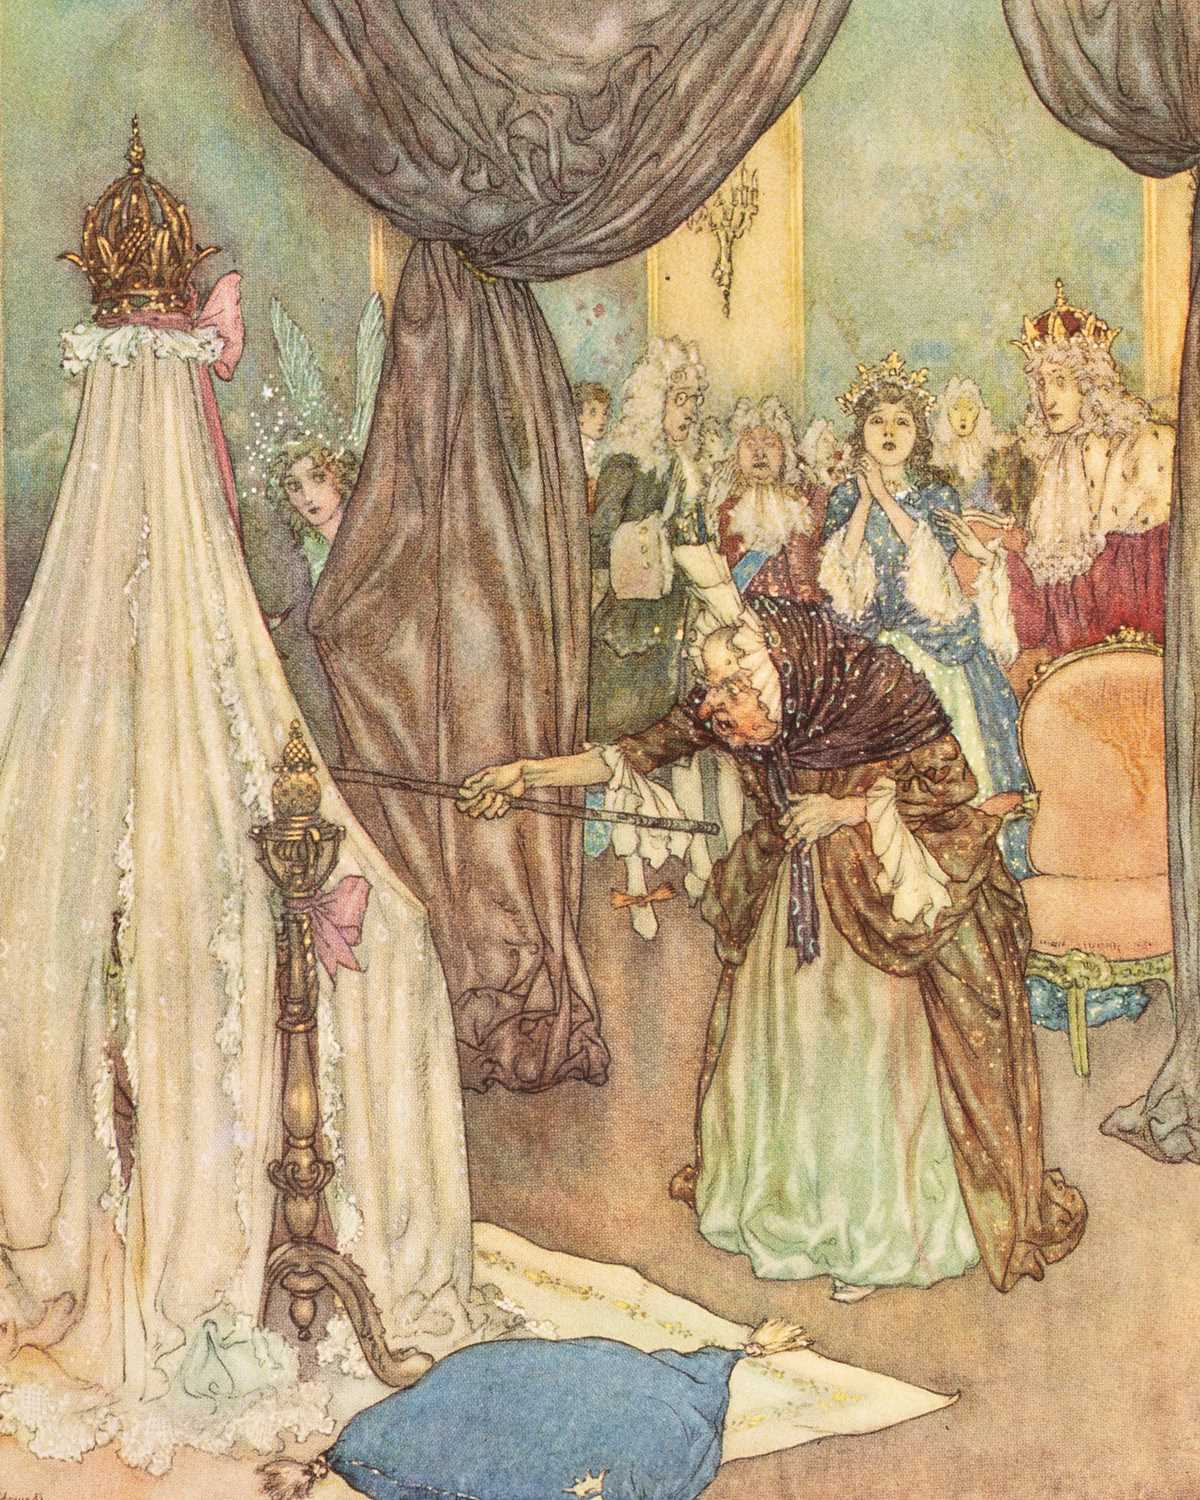 Quiller-Couch (Sir Arthur) The Sleeping Beauty and other fairy tales - Image 8 of 37